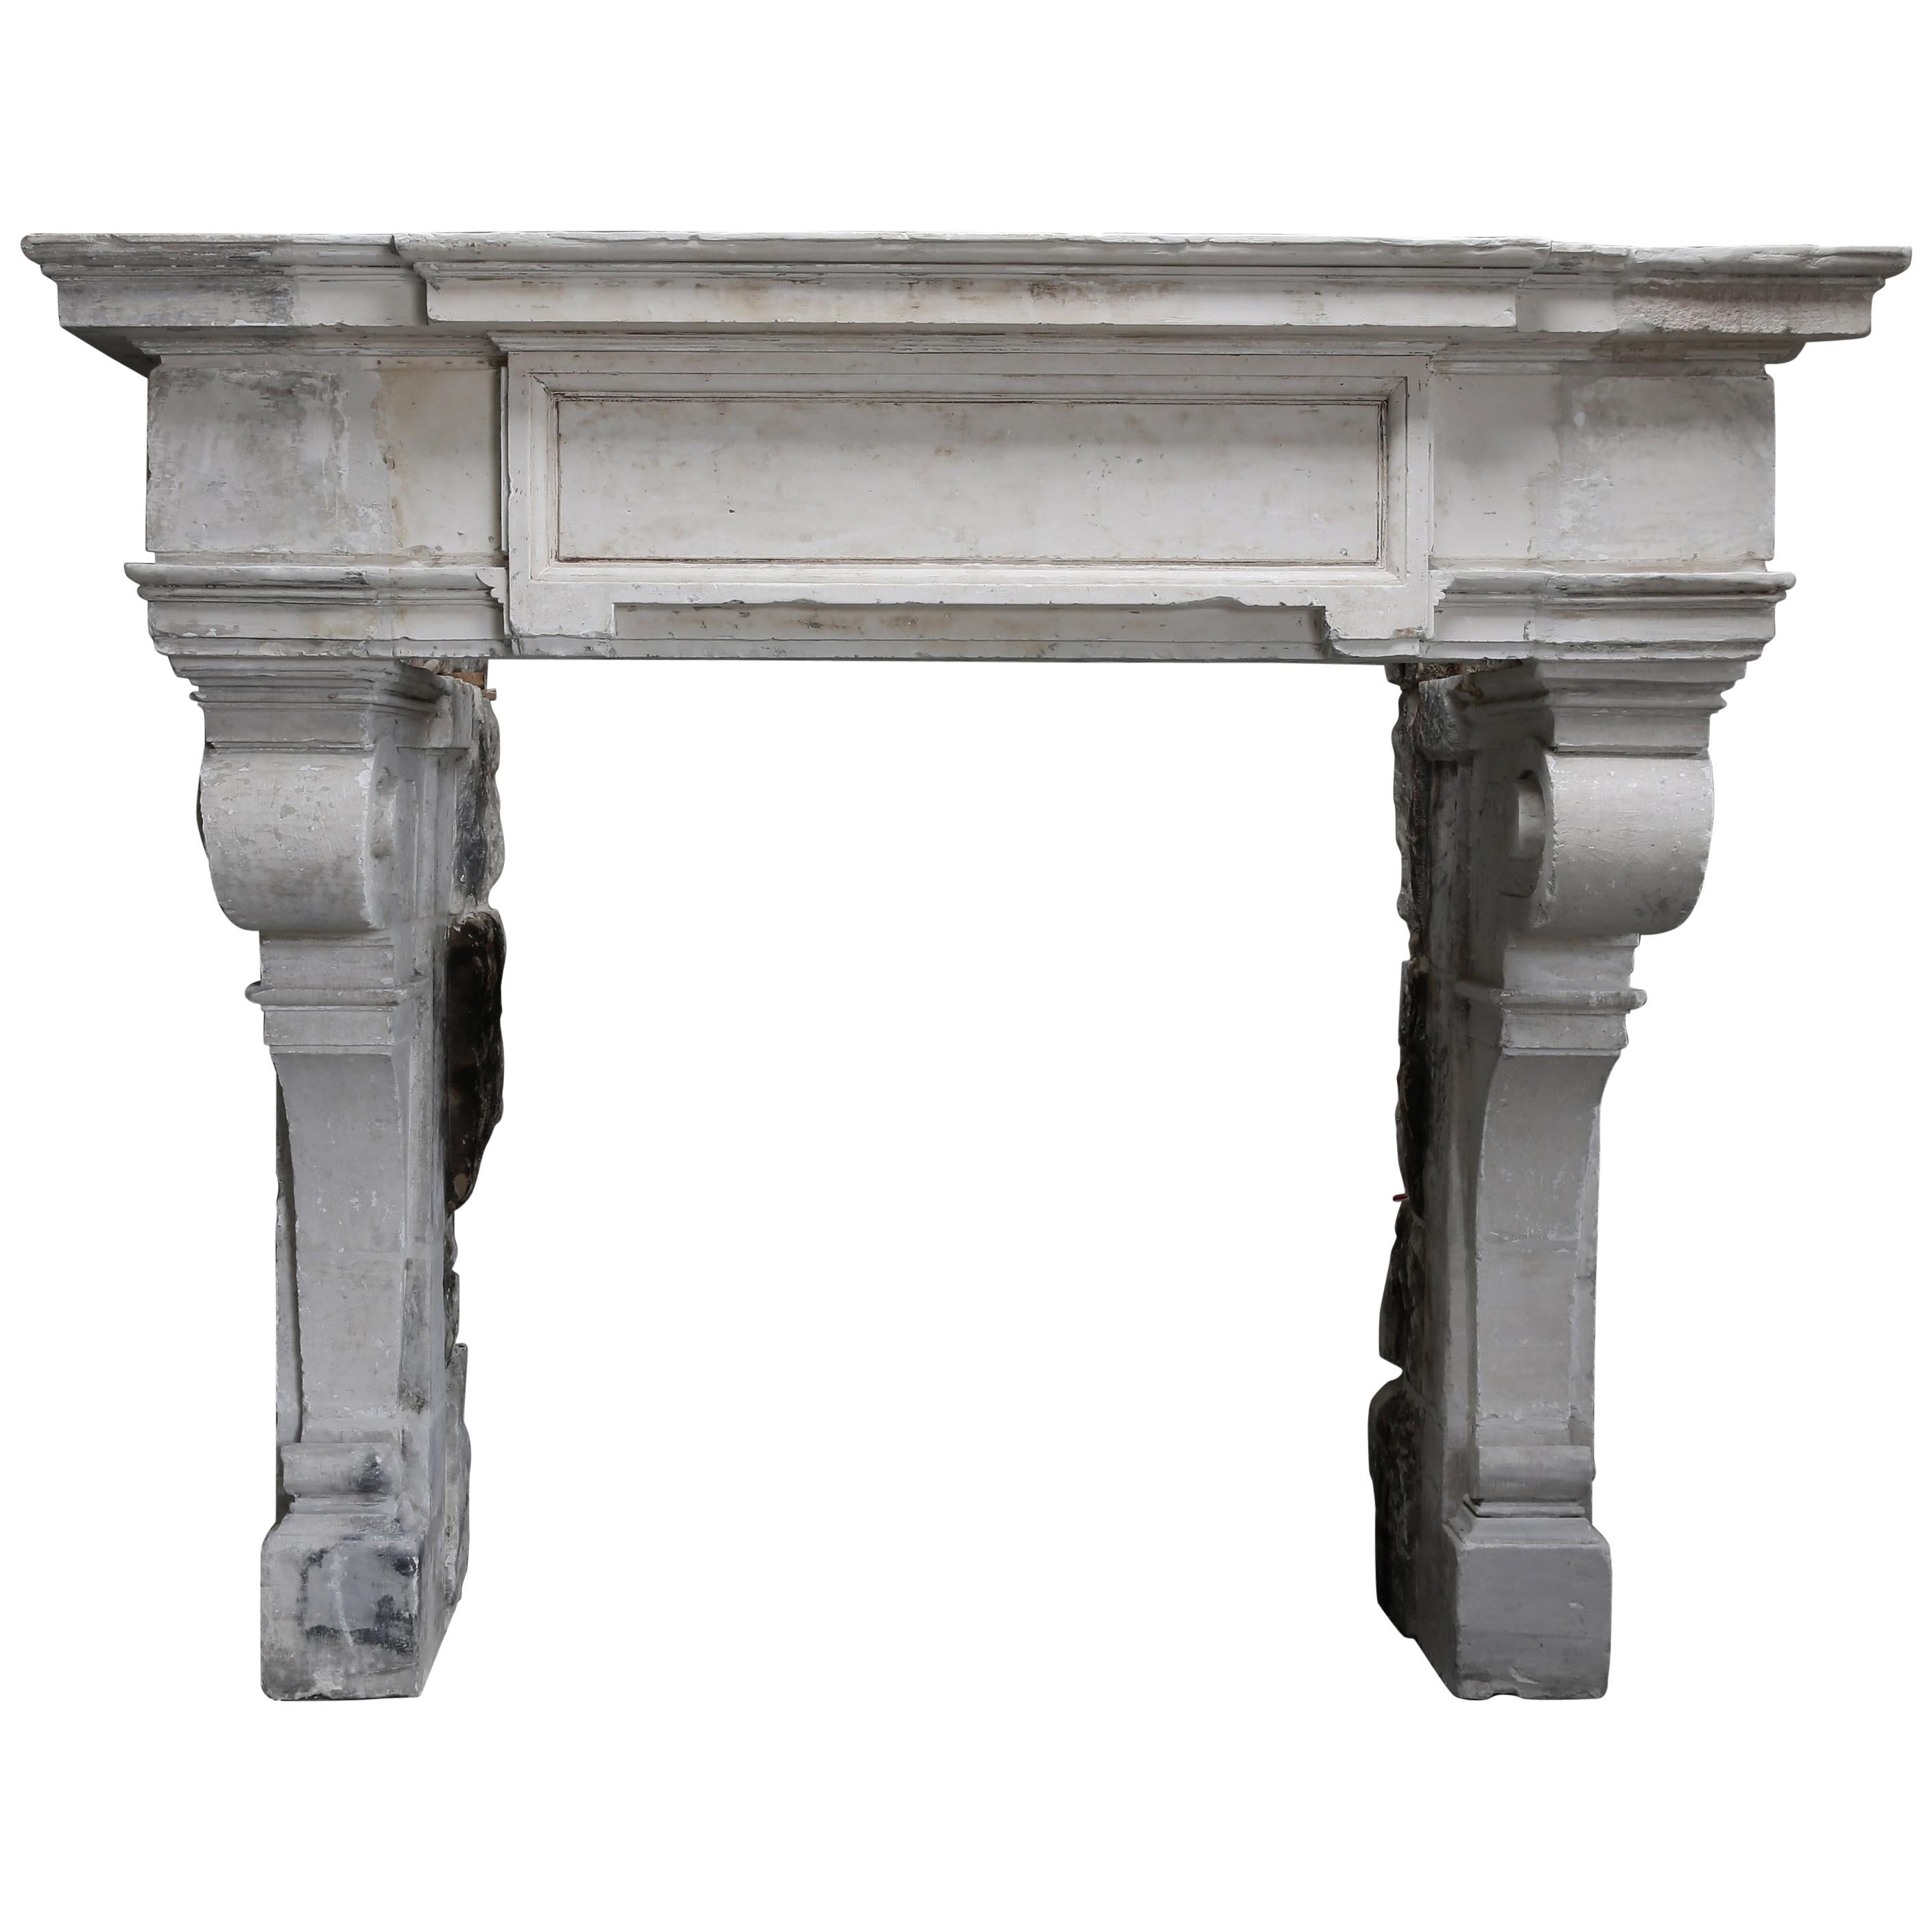 Renaissance Style Mantel from the 18th Century of French Limestone